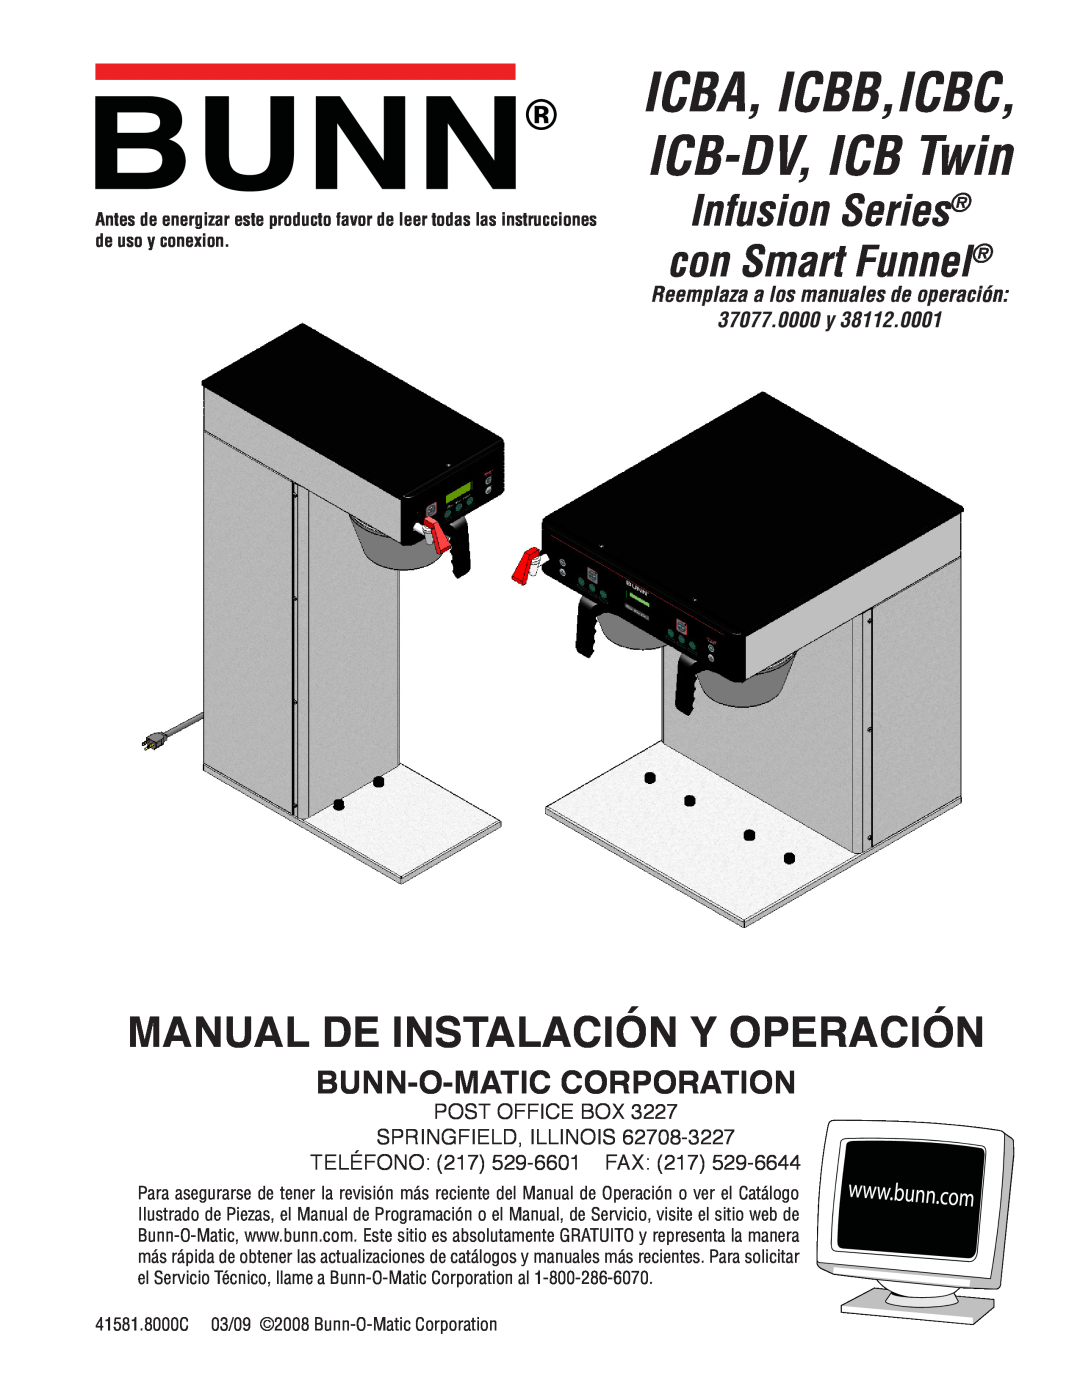 Bunn service manual ICBA, ICBB,ICBC ICB-DV, ICB Twin, Installation & Operating Guide, Infusion Series with Smart Funnel 